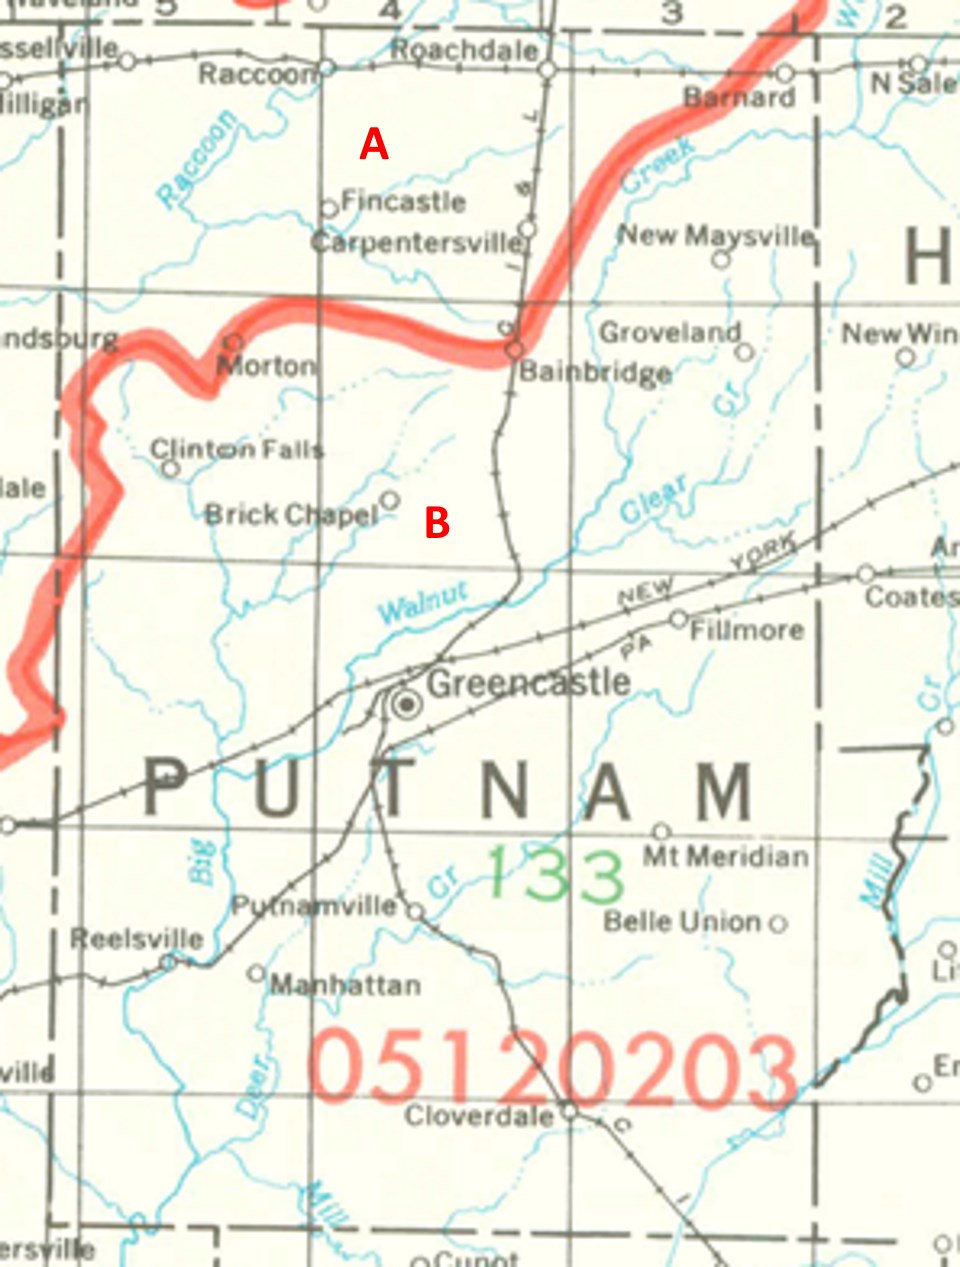 Putnam County Indiana Watersheds map